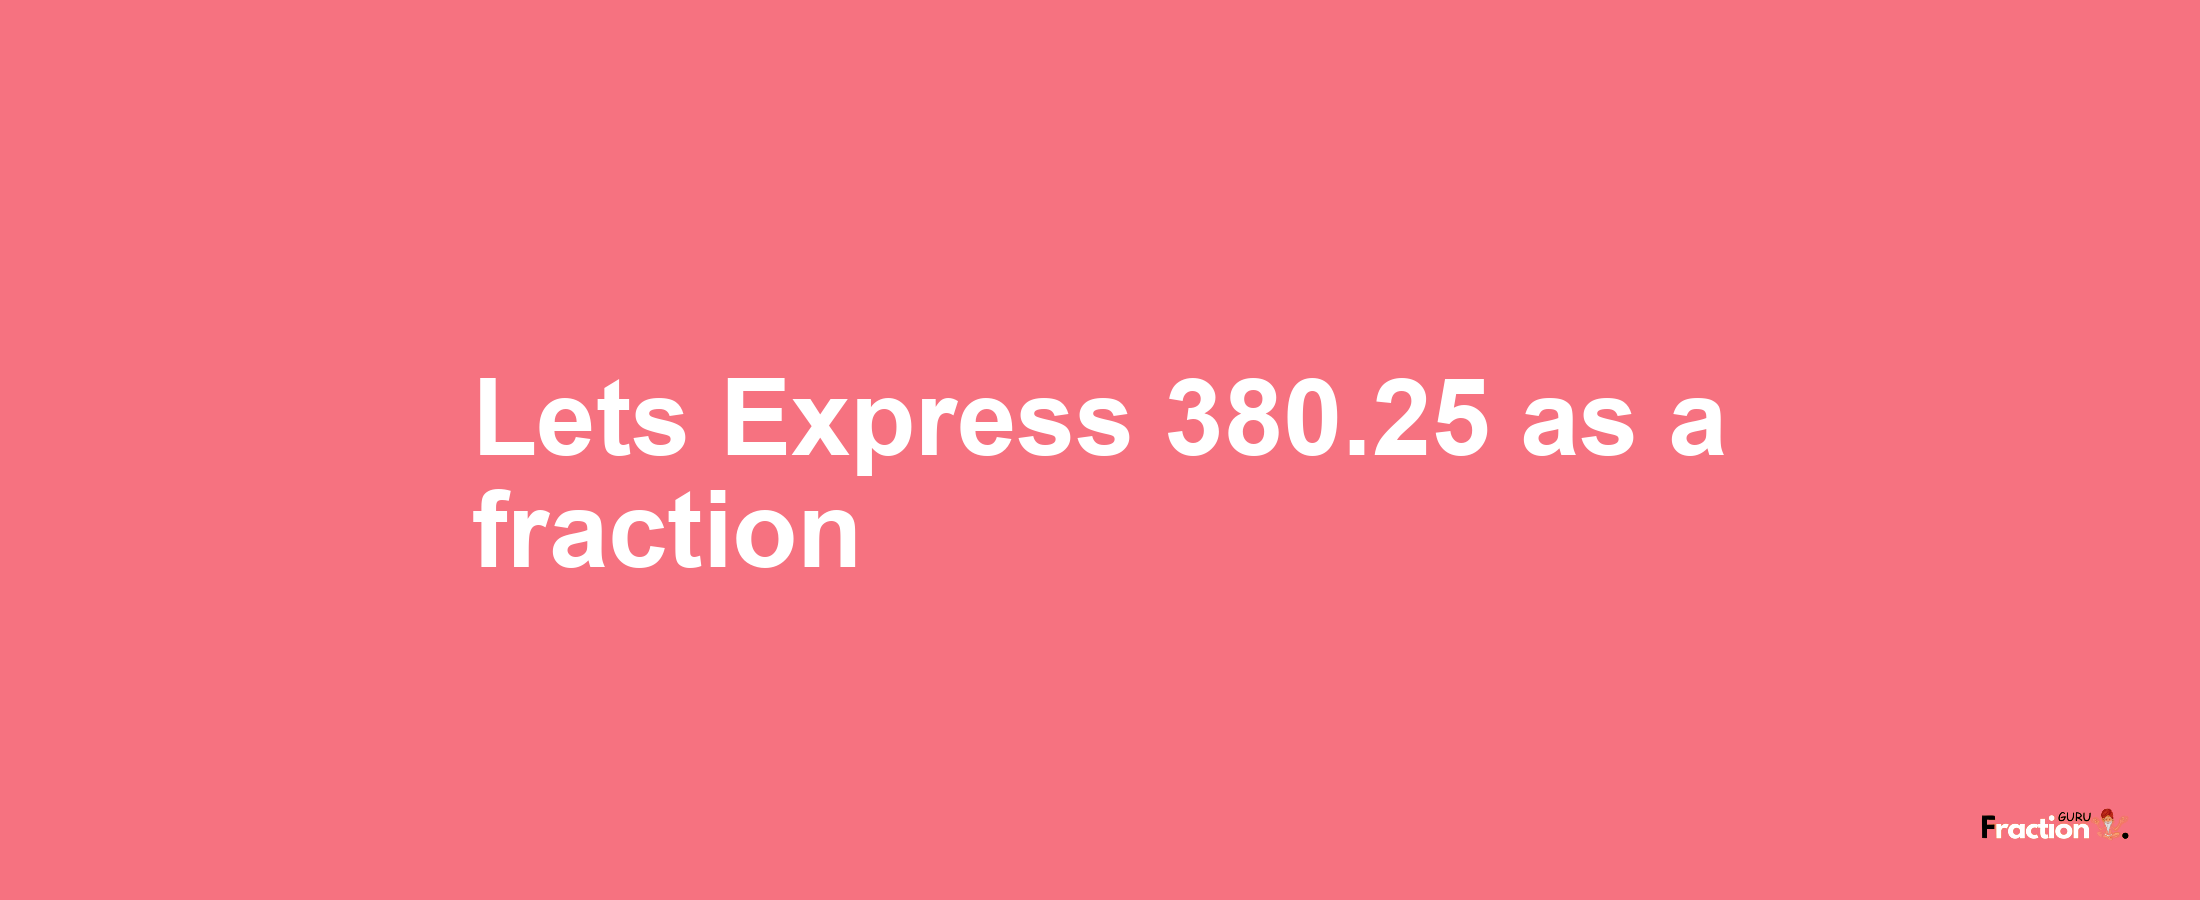 Lets Express 380.25 as afraction